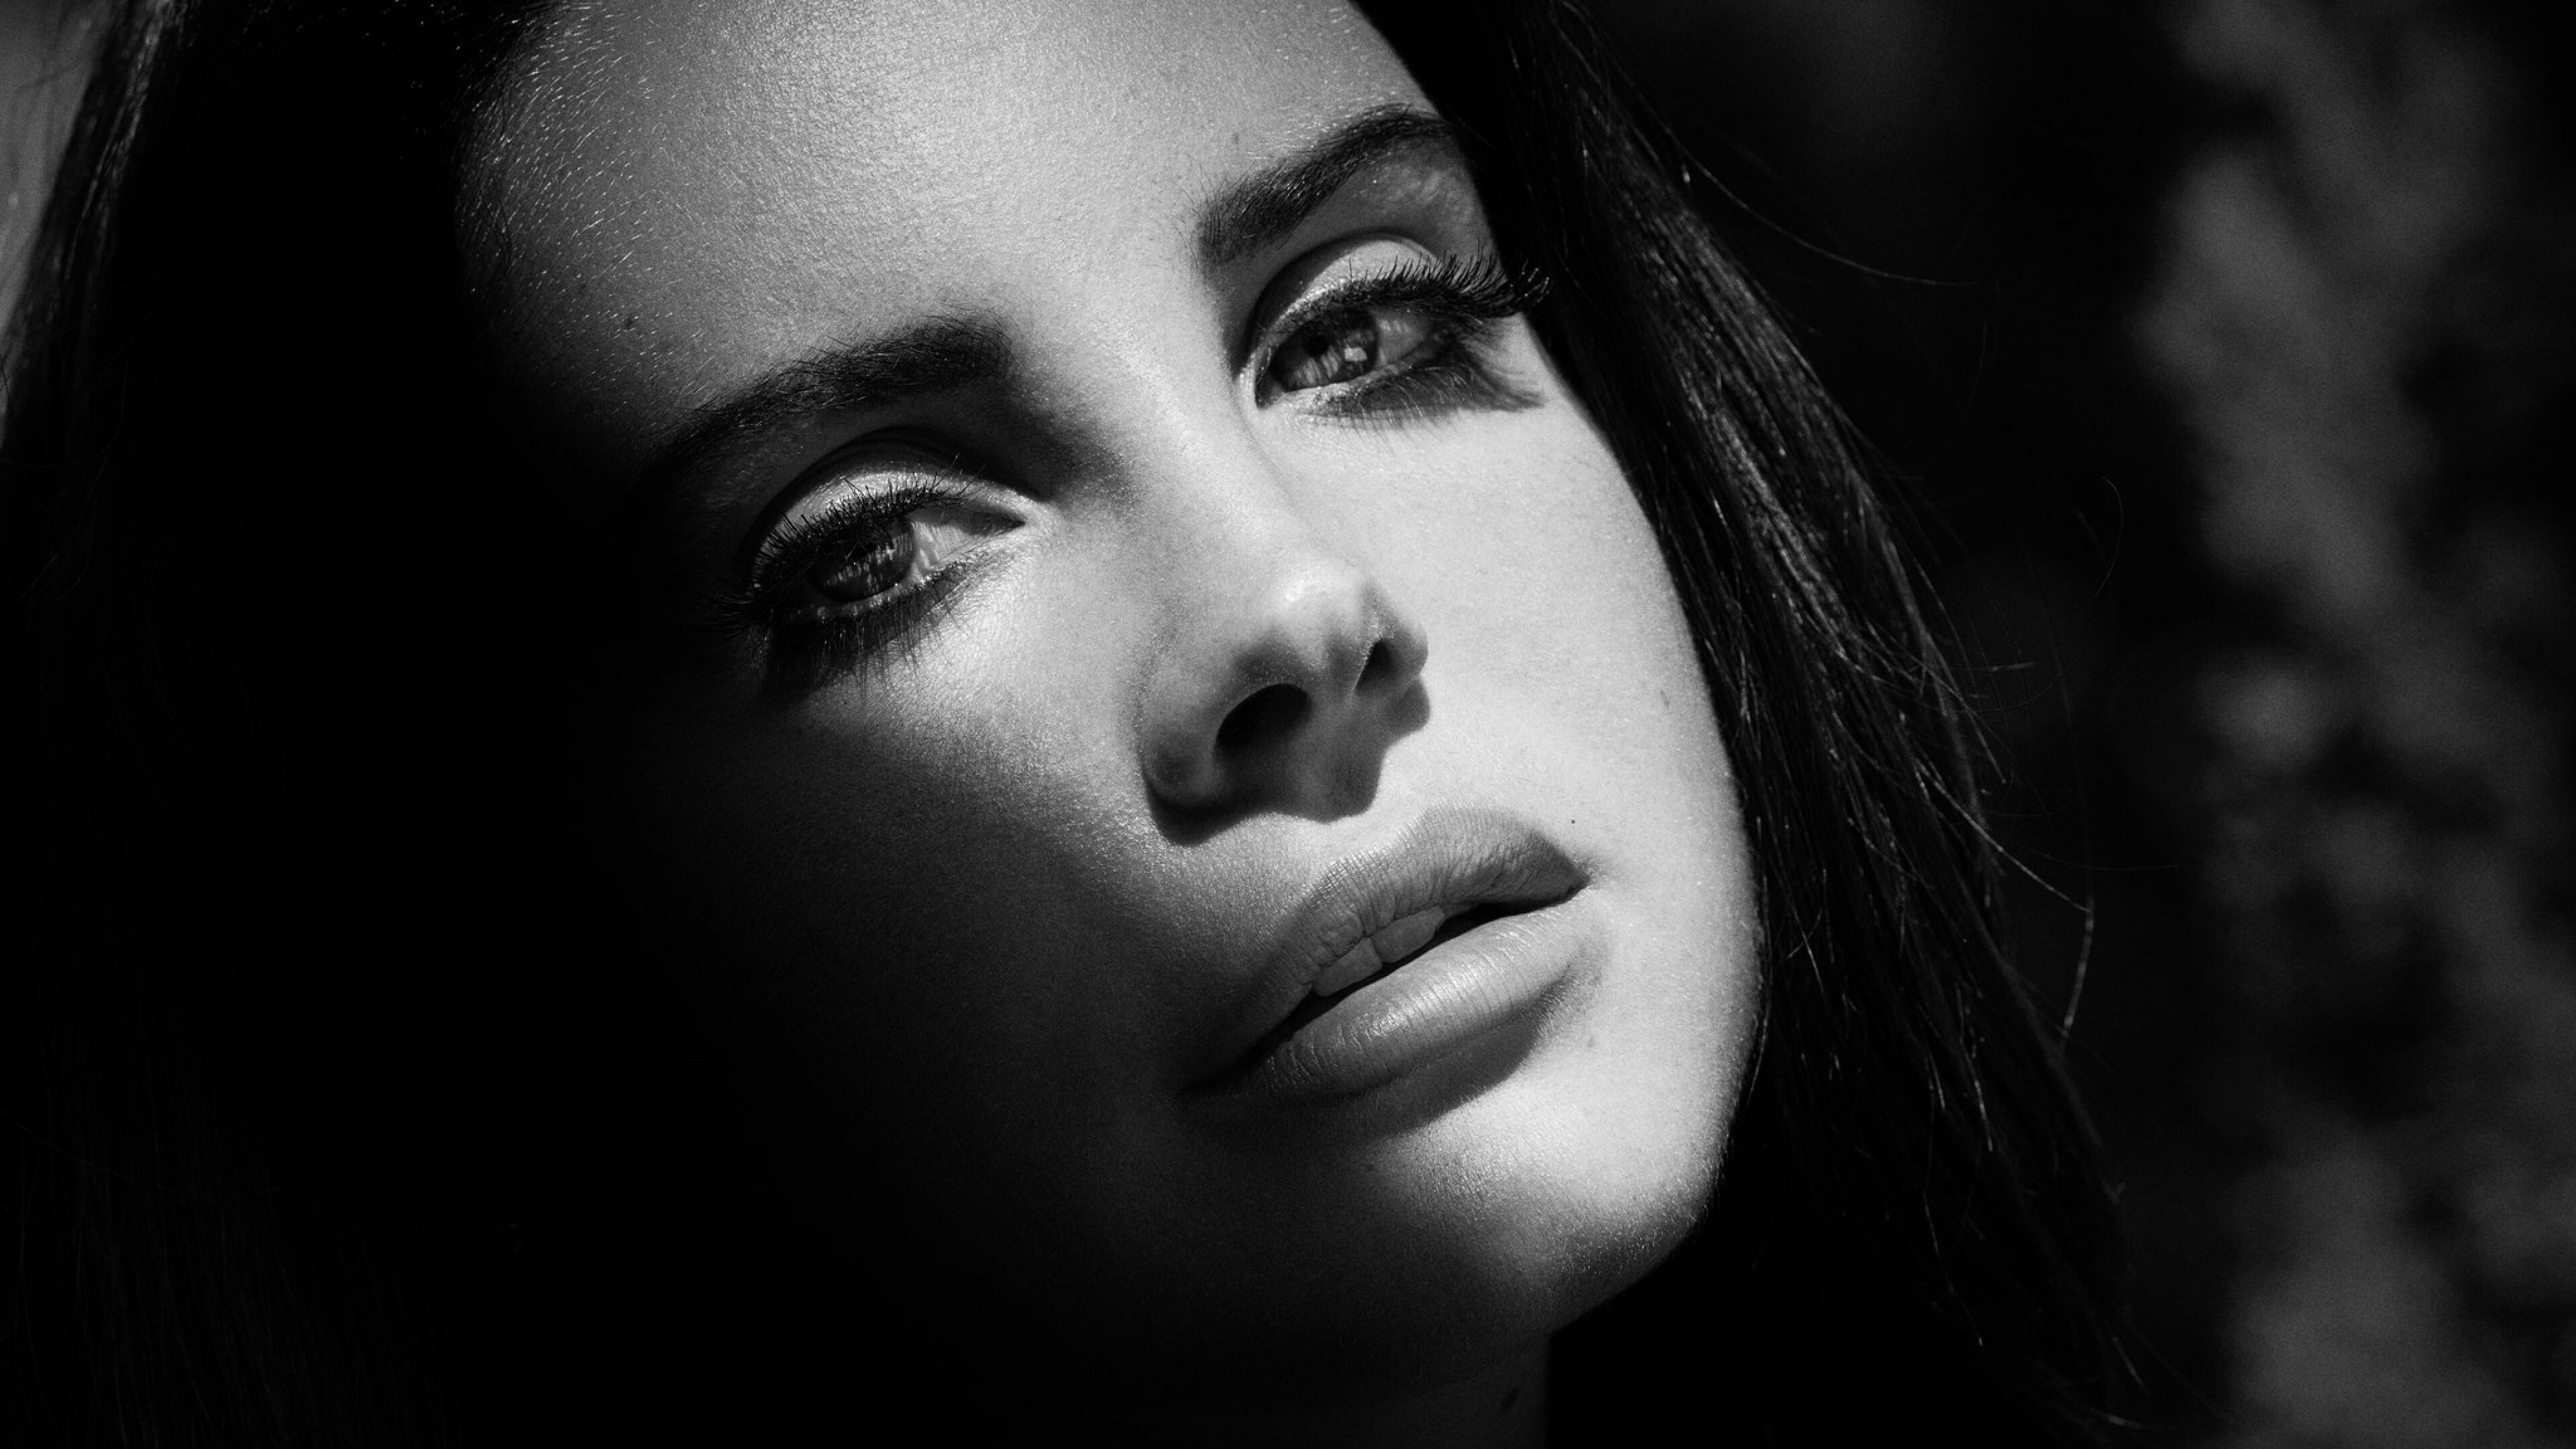 Lana Del Rey: An American singer-songwriter, Young and Beautiful, Monochrome. 3840x2160 4K Wallpaper.